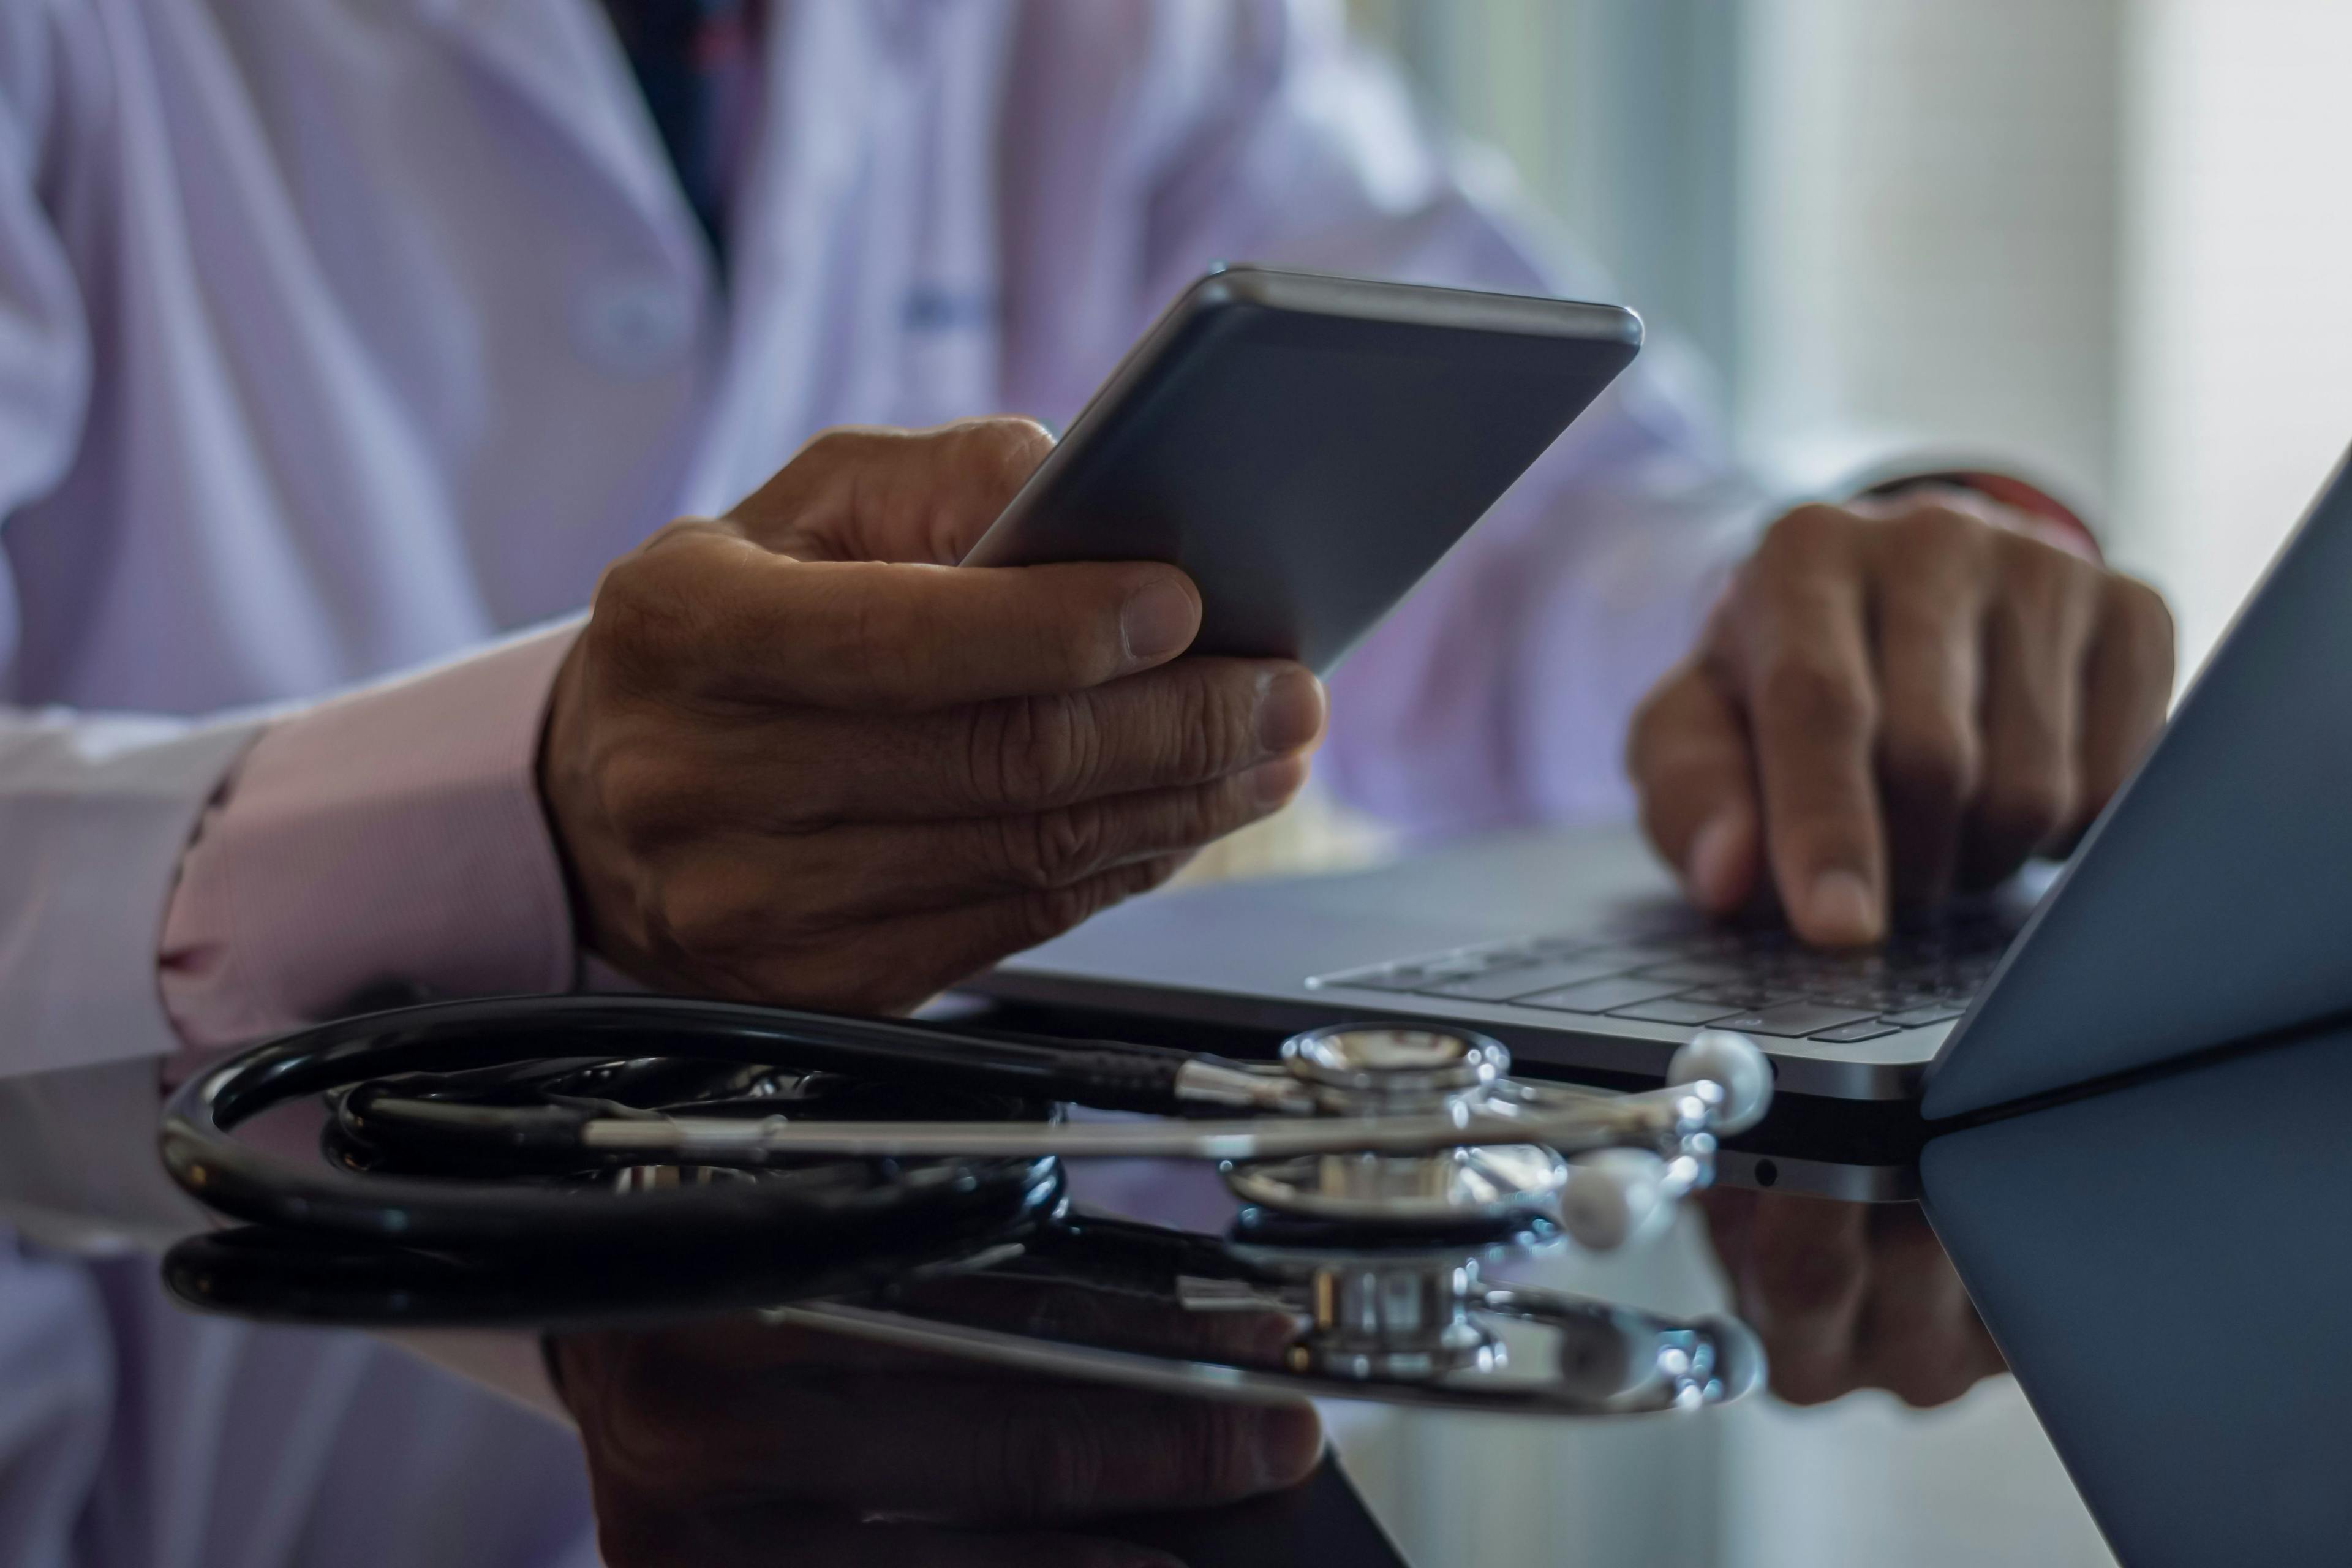 From Amazon to Zocdoc, health industry urges passage of telemedicine bill